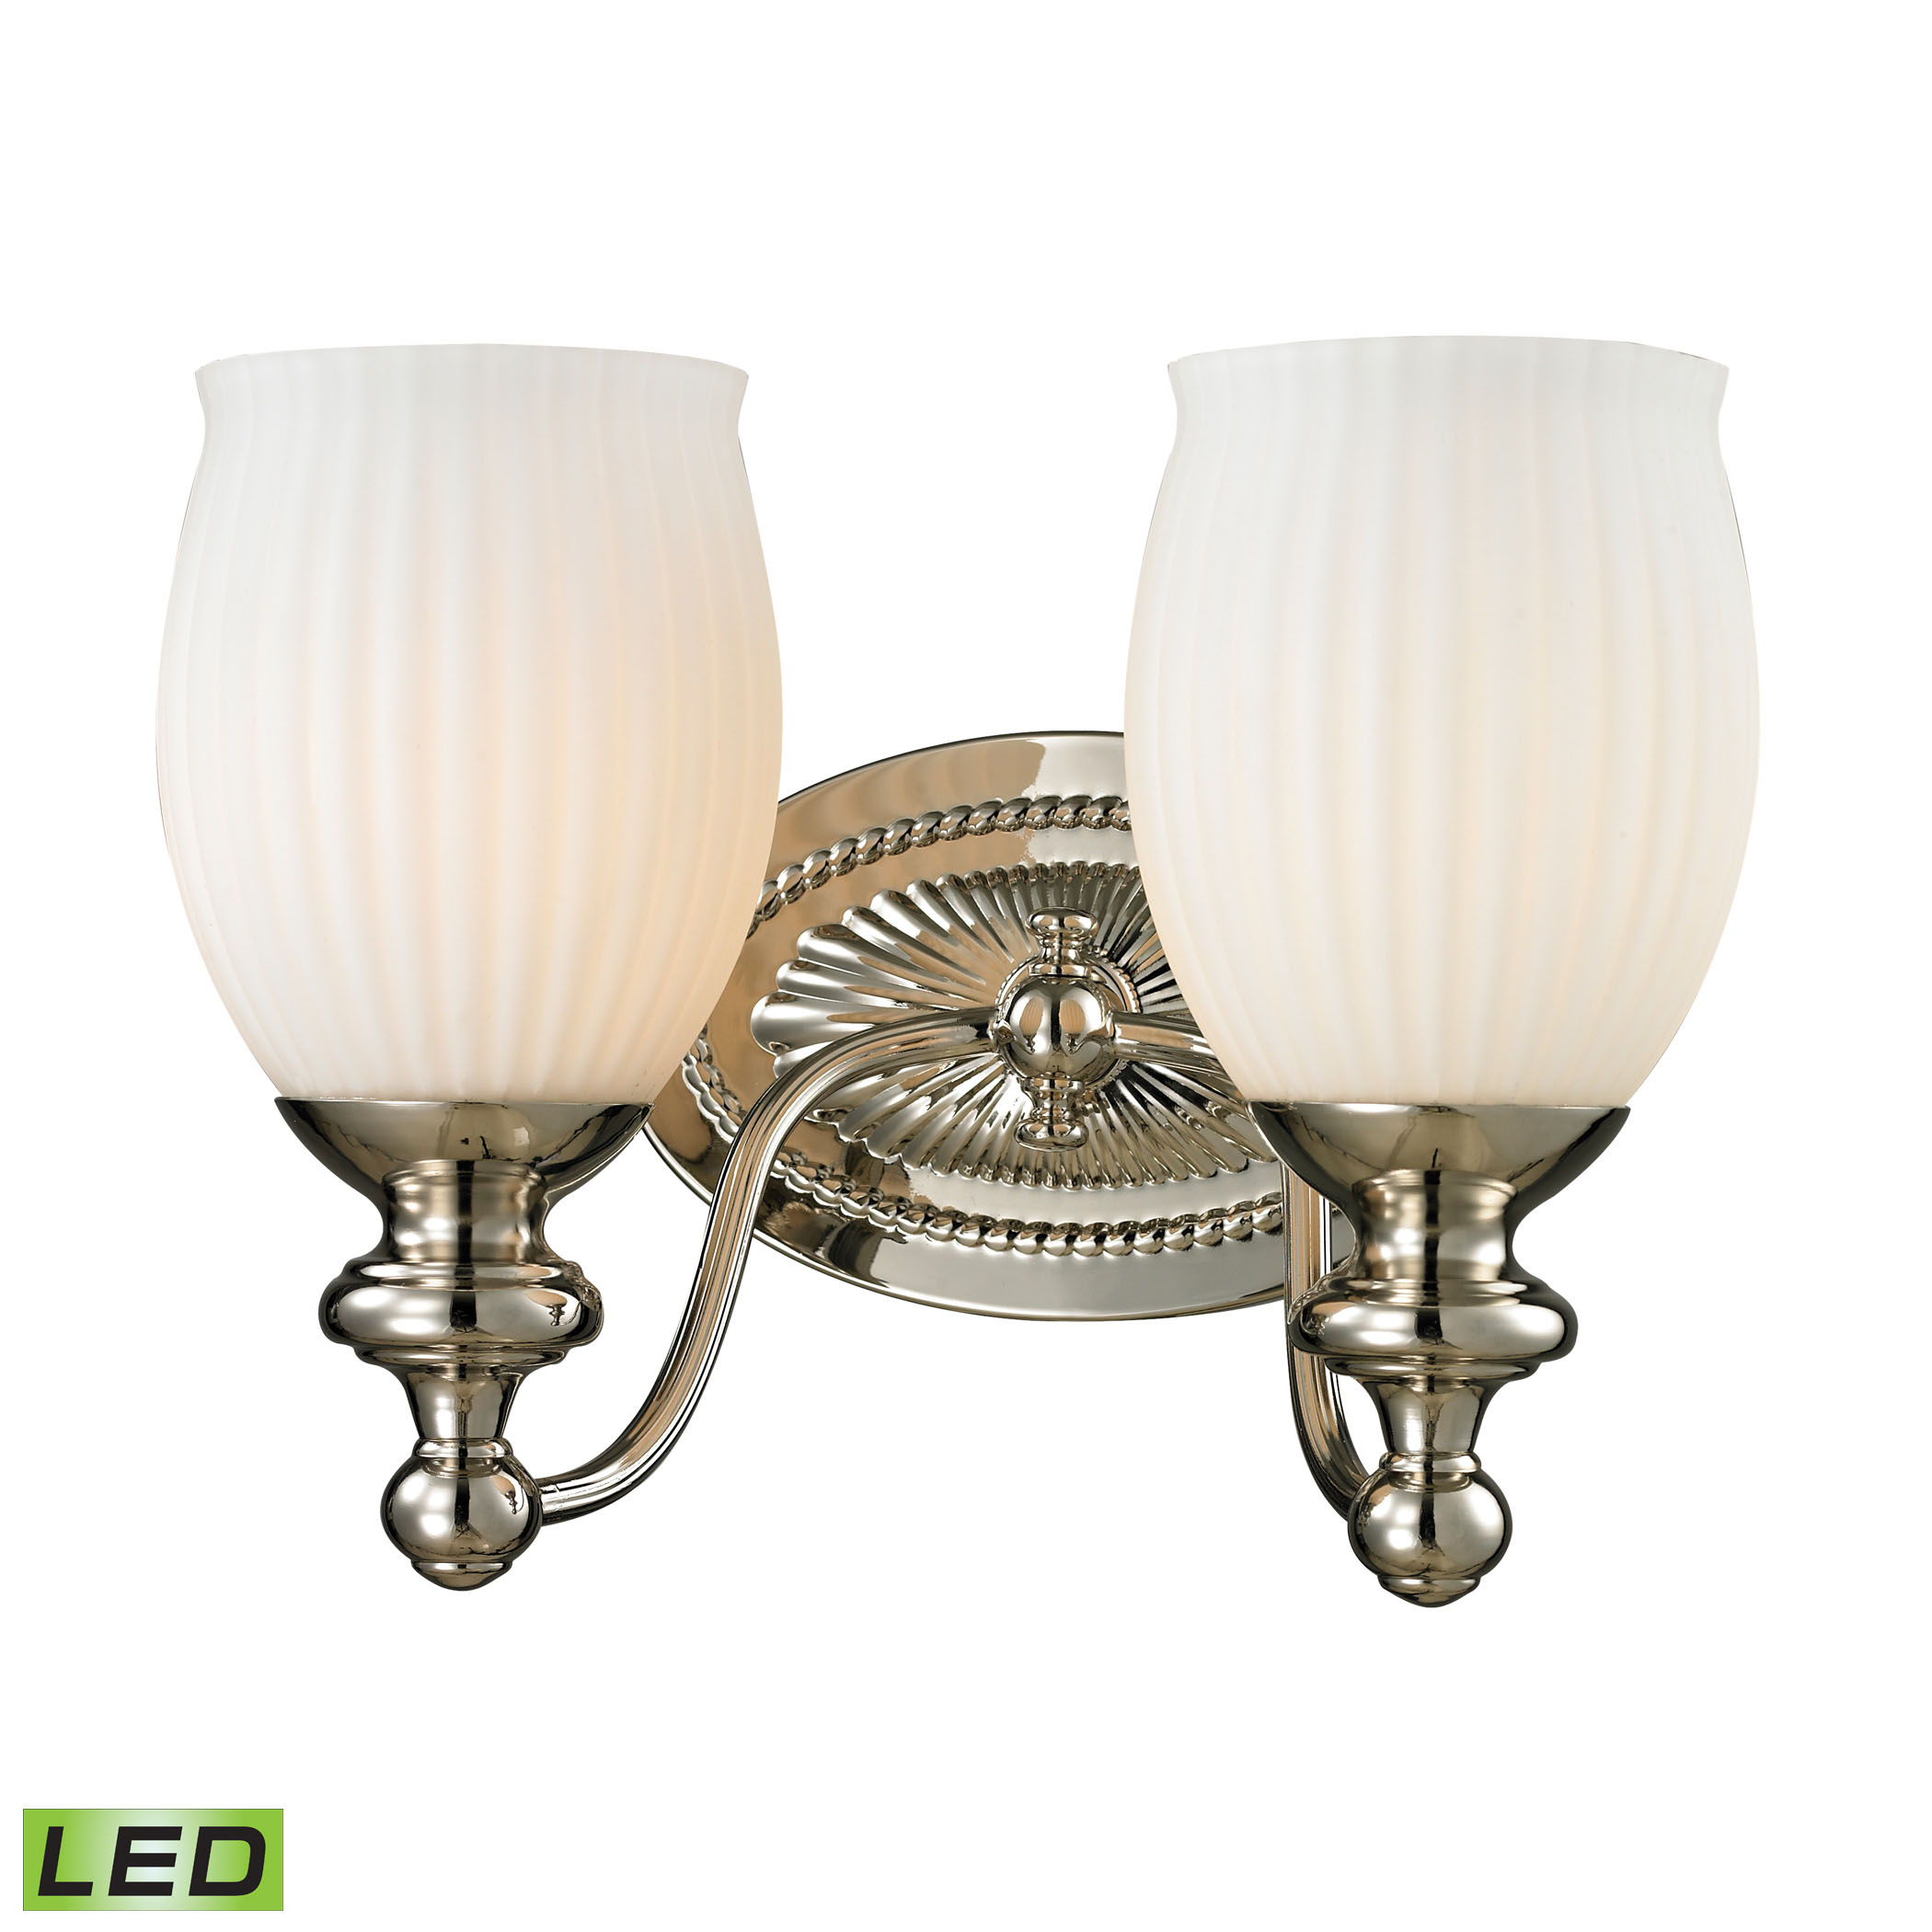 Park Ridge Collection 2 Light Bath in Polished Nickel - LED, 800 Lumens (1600 Lumens Total) with Full